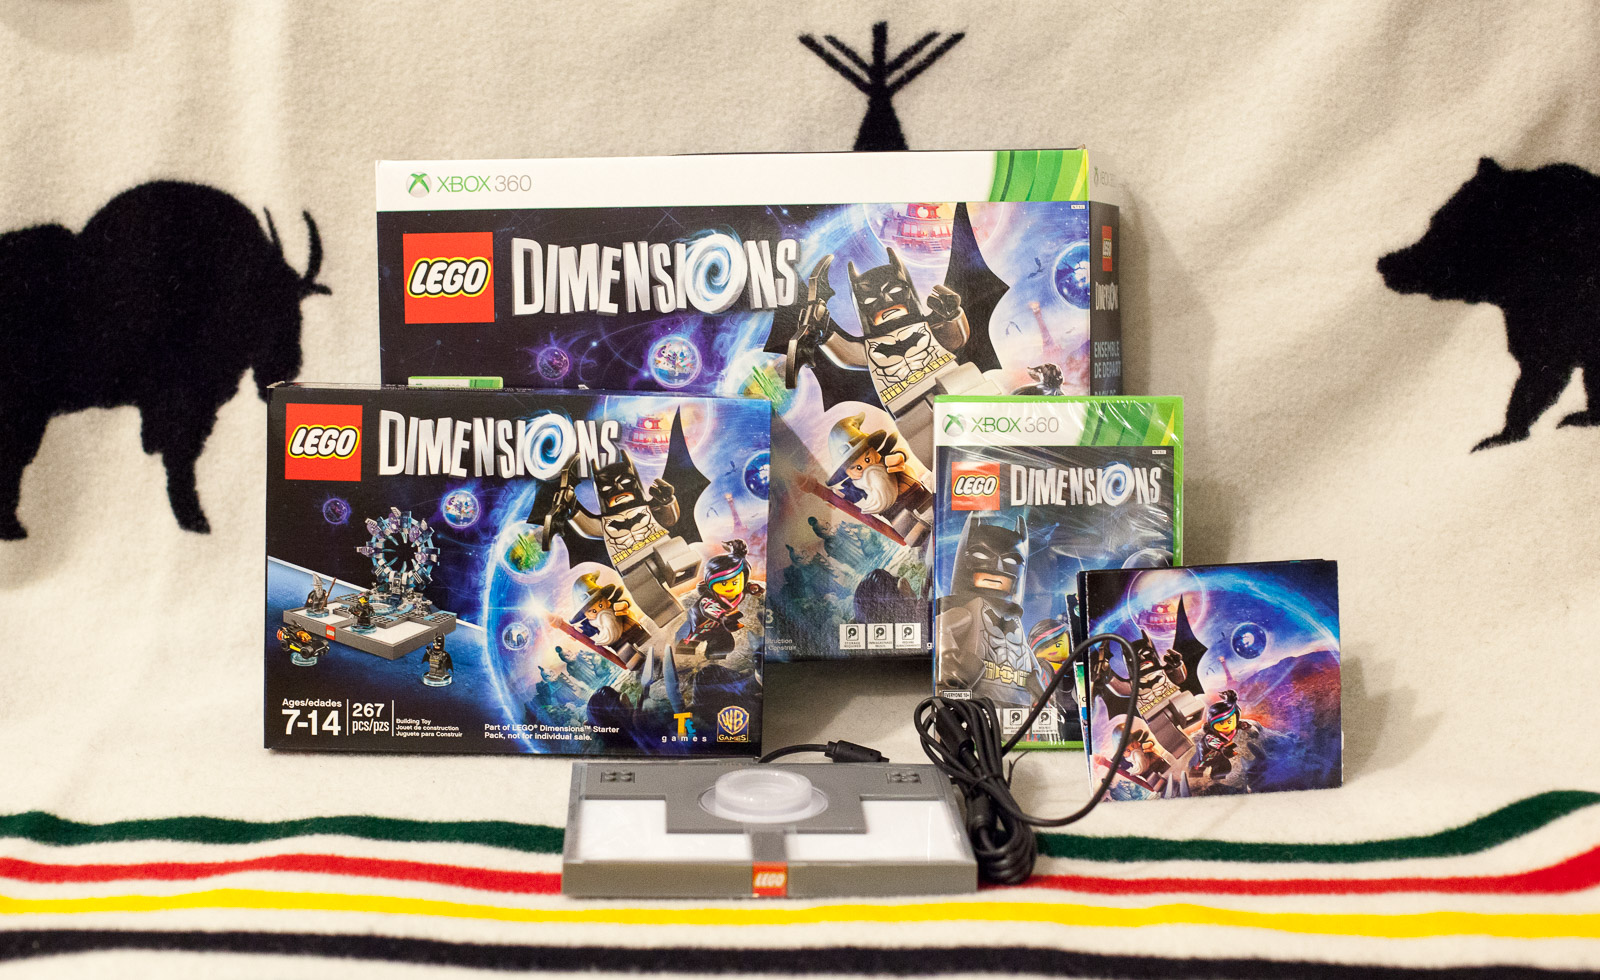 Contents of LEGO Dimensions Starter Pack